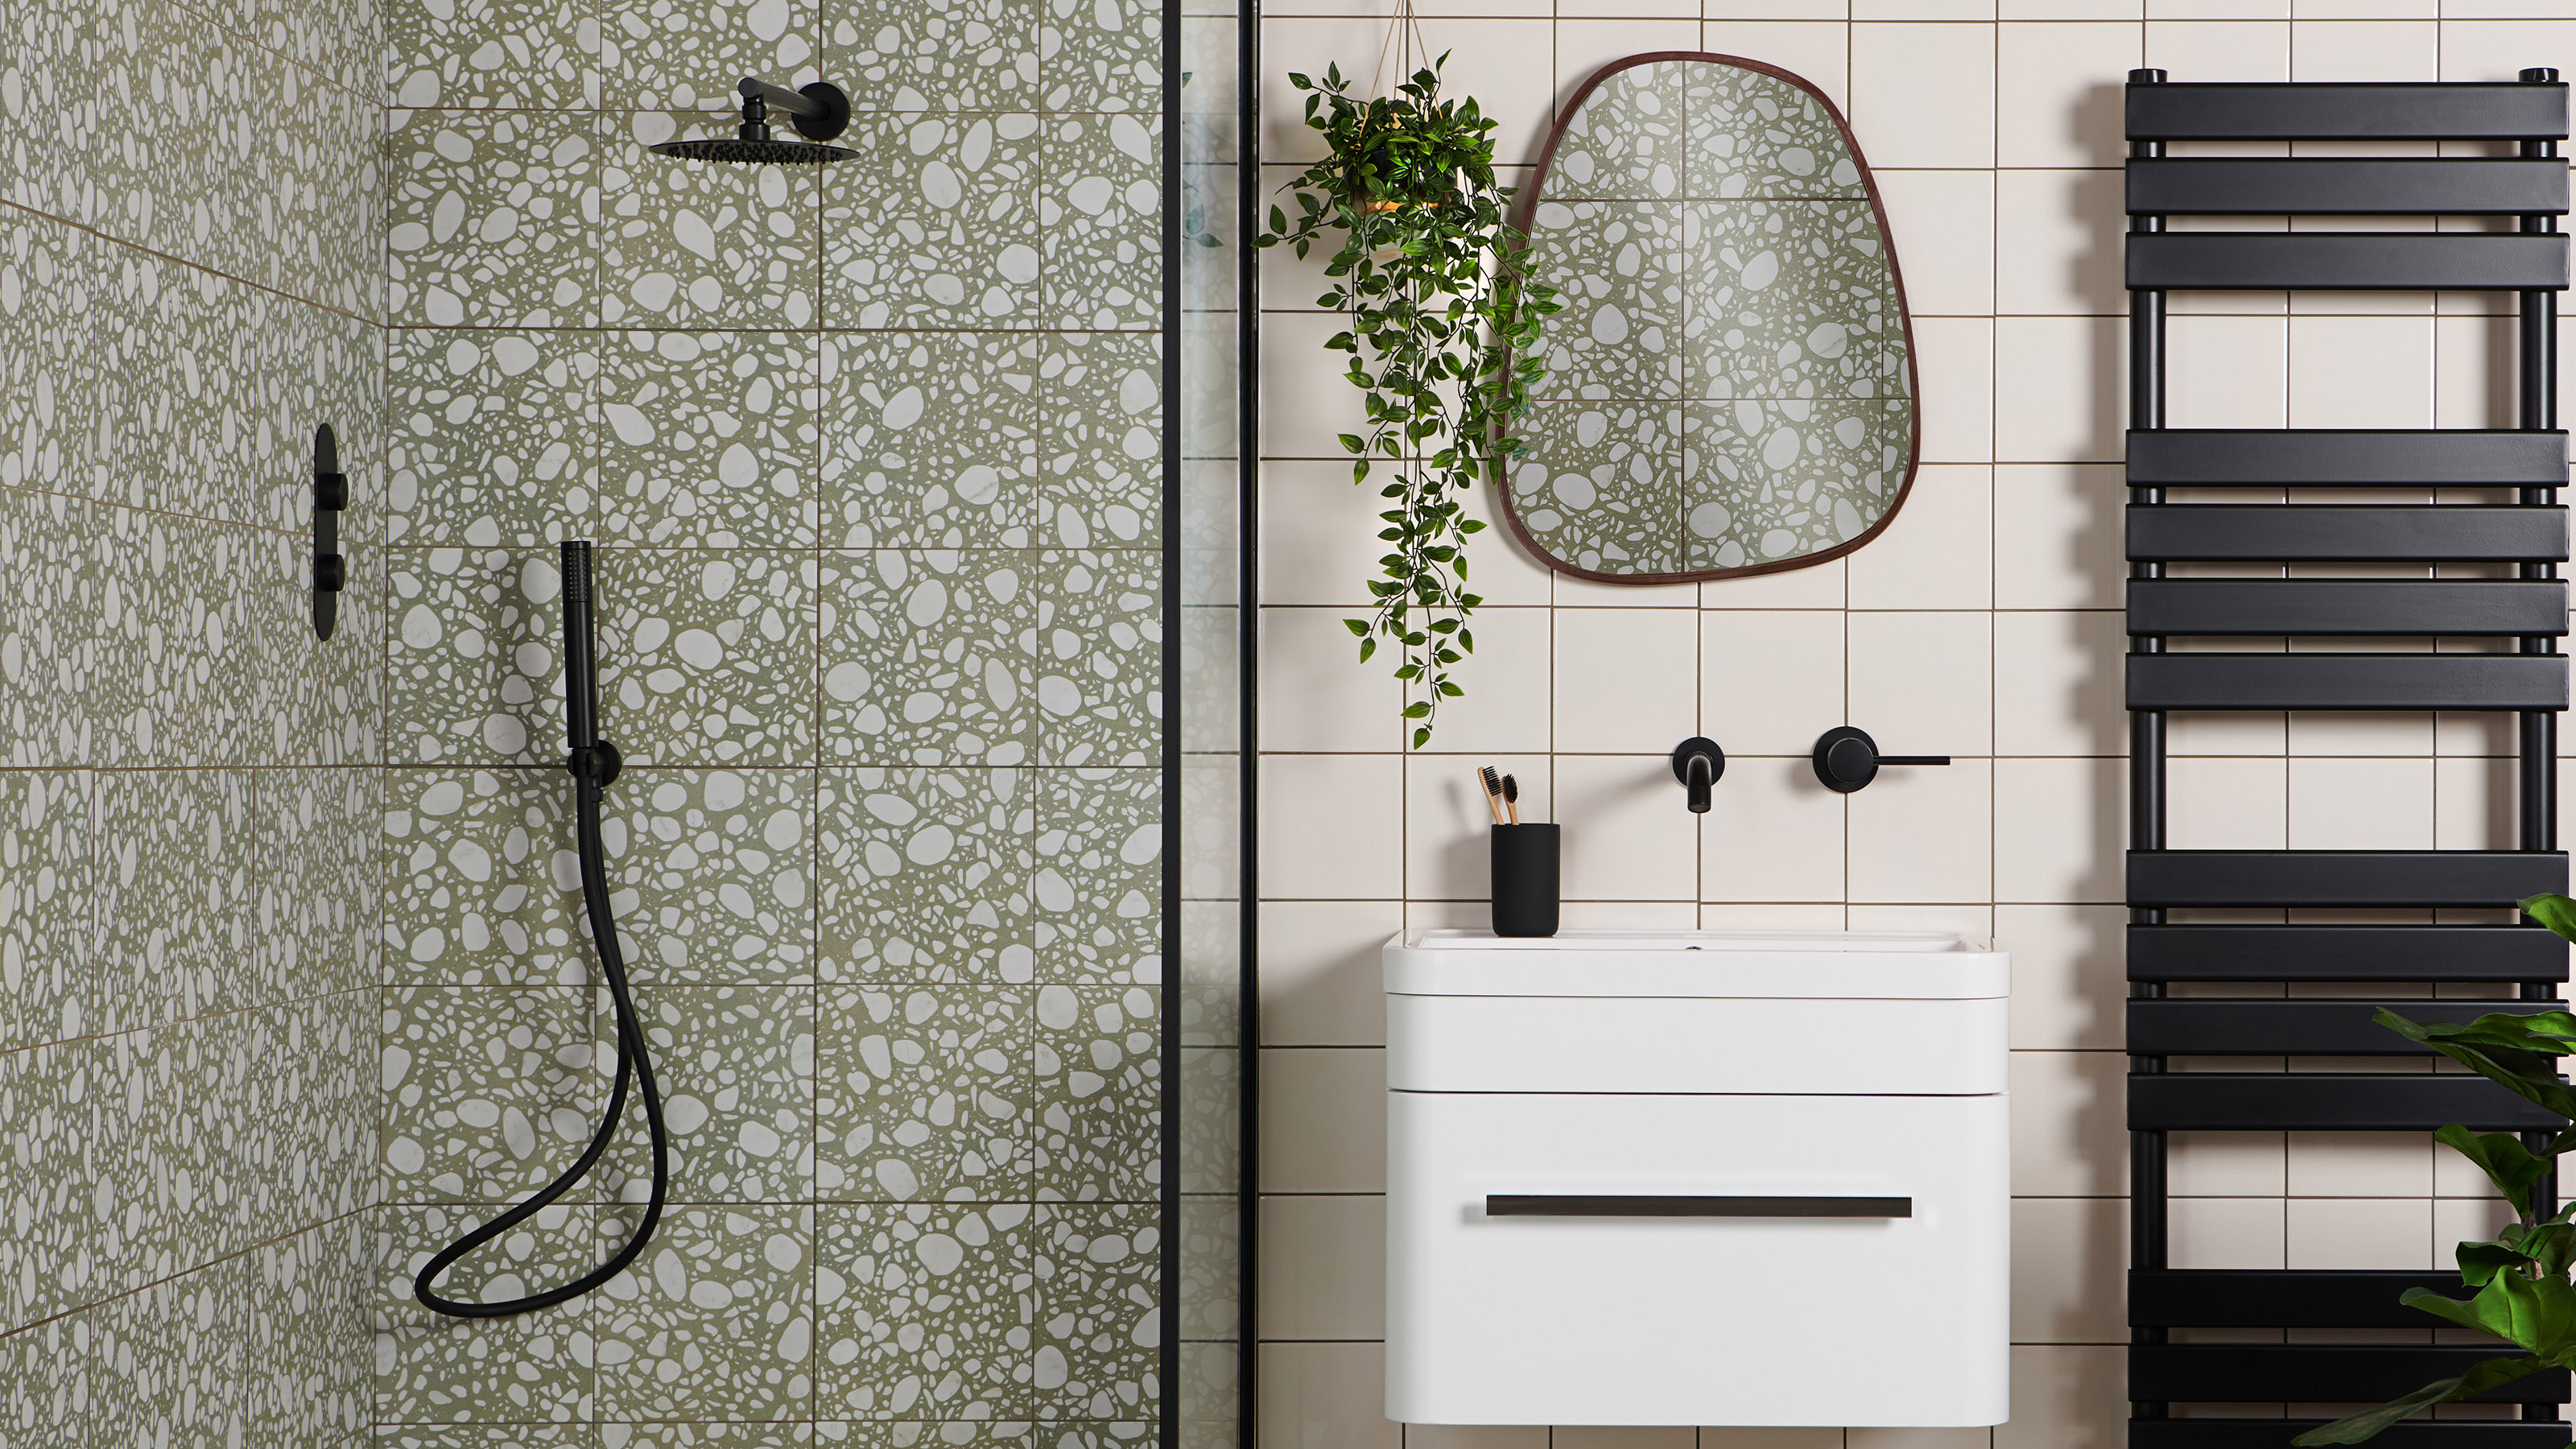 Bathroom trends 20 – 20 looks for a unique upgrade   Real Homes